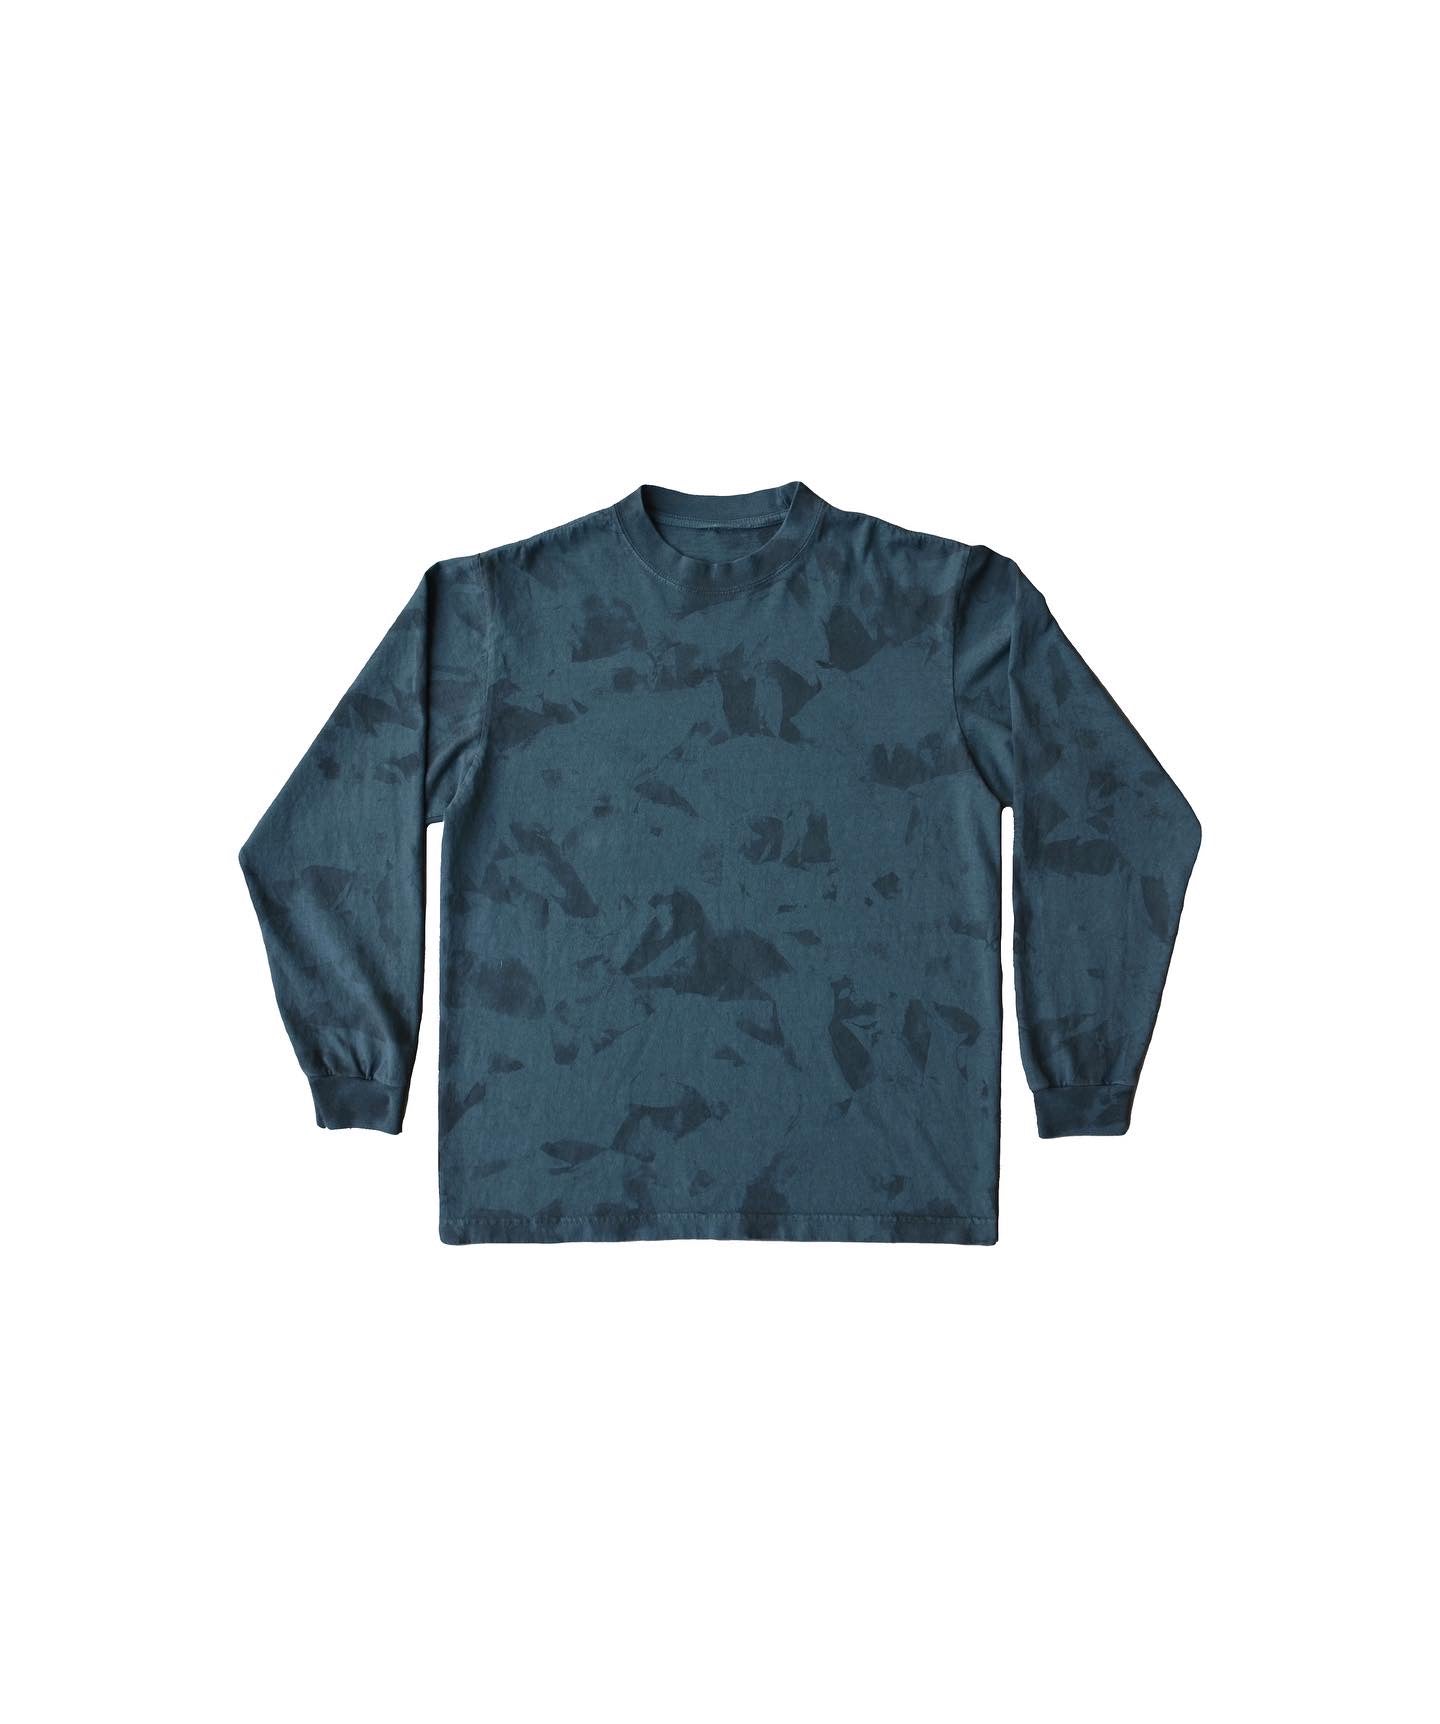 CHAMBRAY BLUE STAINED LONG-SLEEVE TEE